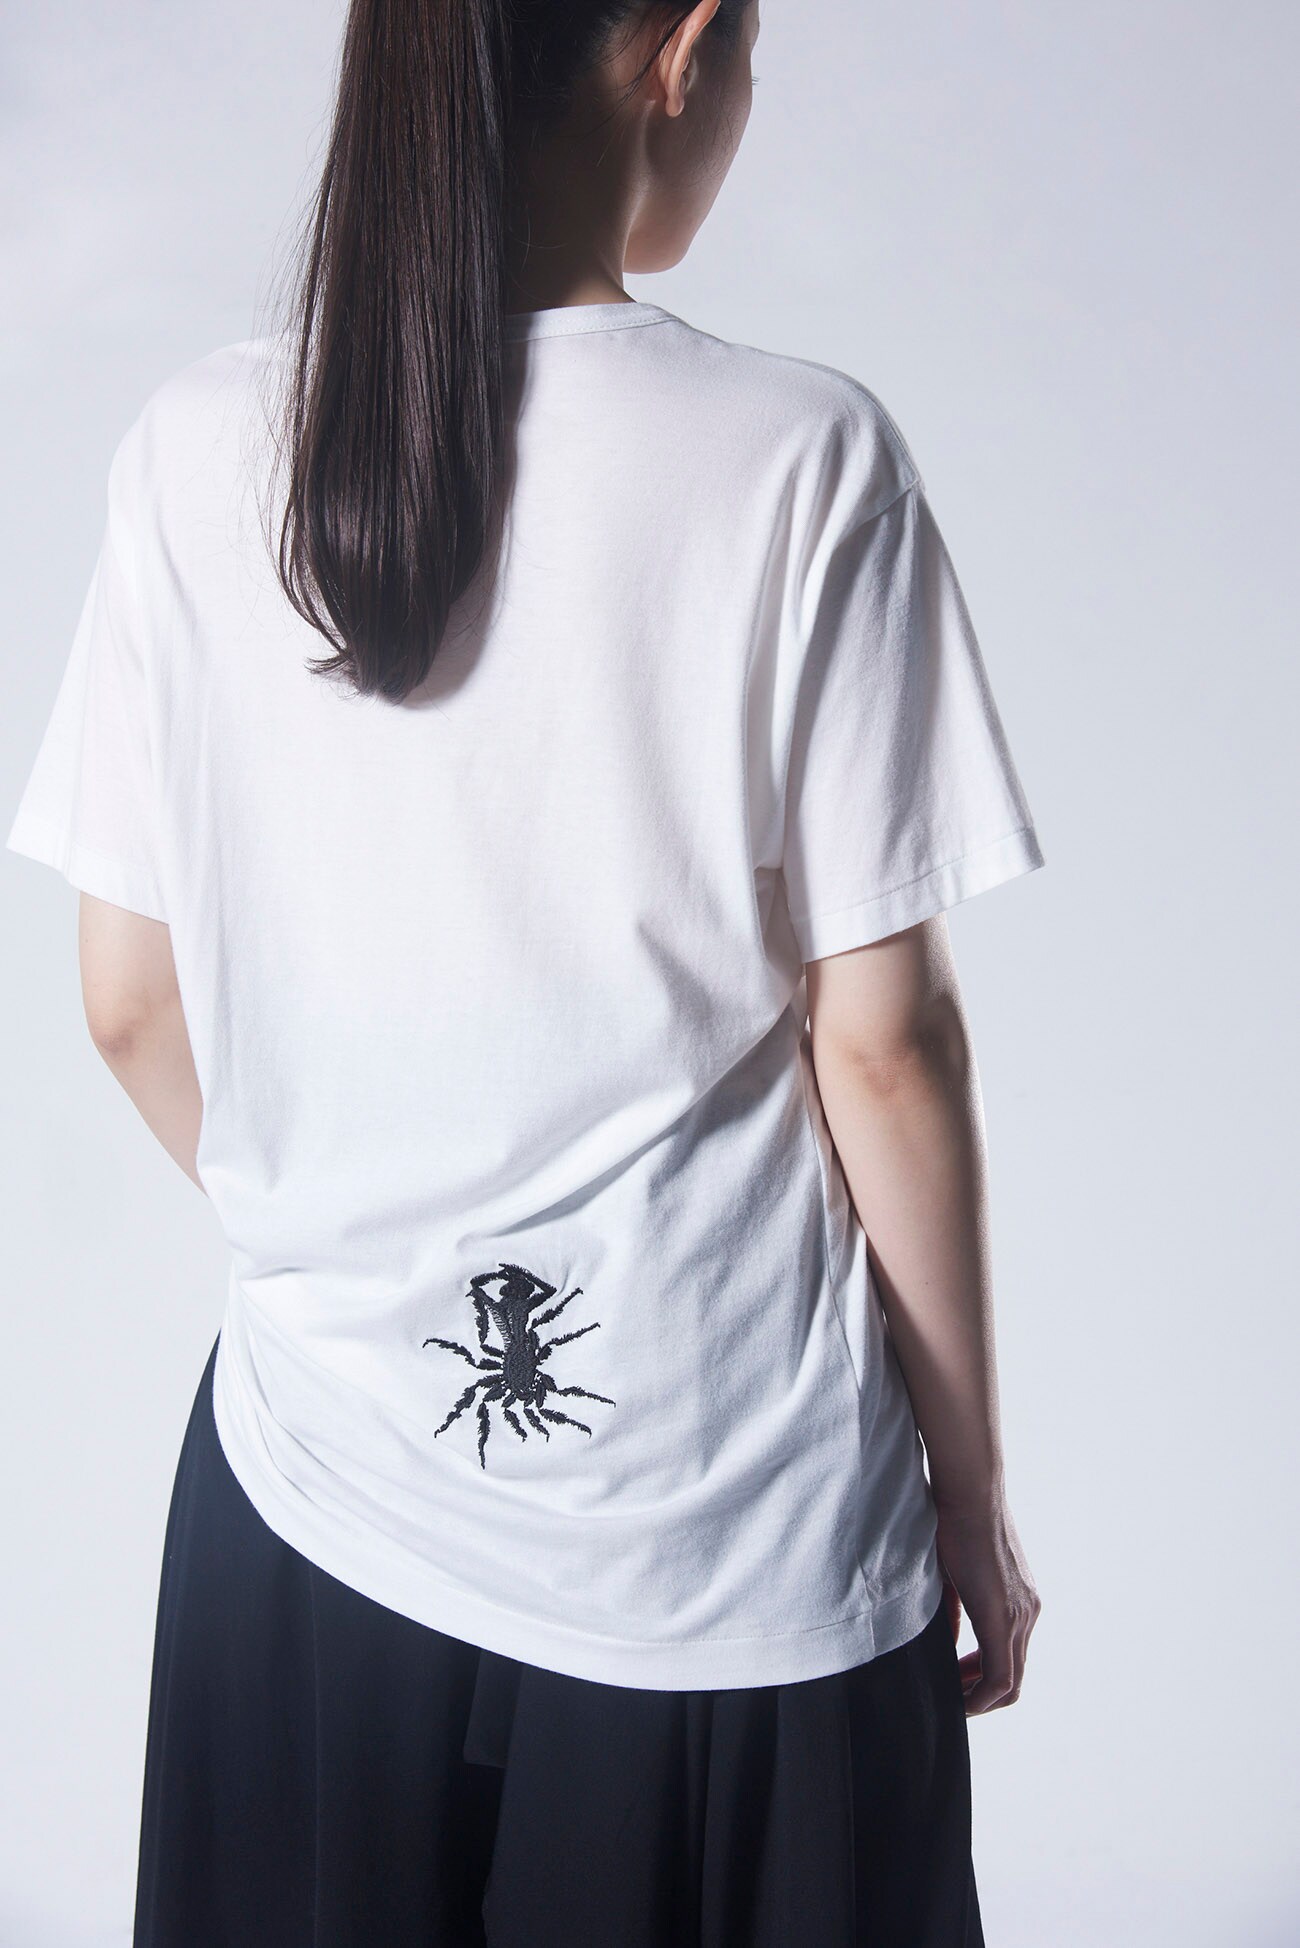 B/Cotton Embroidery S/S Tee